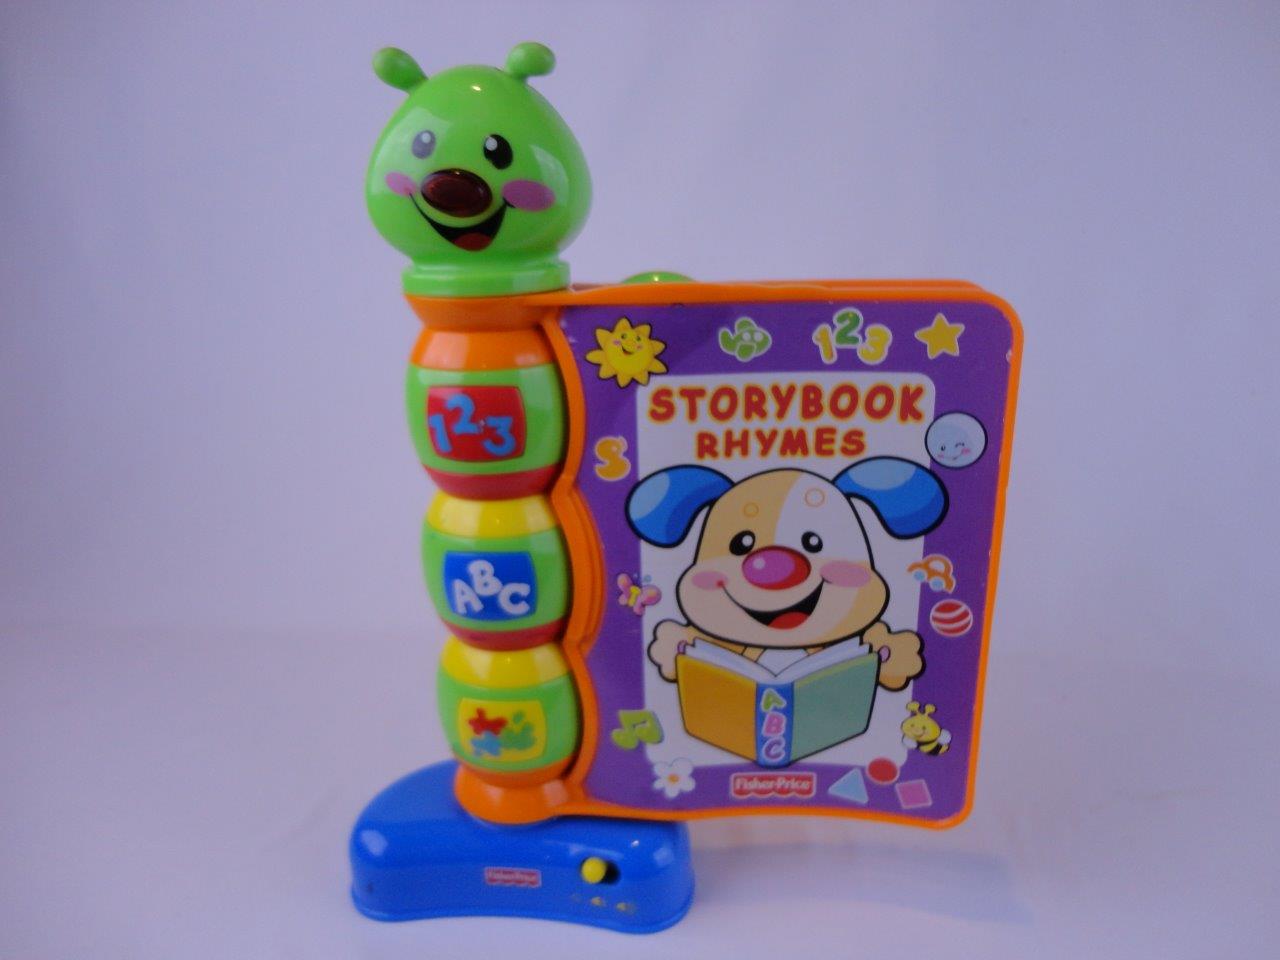 FisherPrice Laugh & Learn Storybook Rhymes - GoodBye Toys